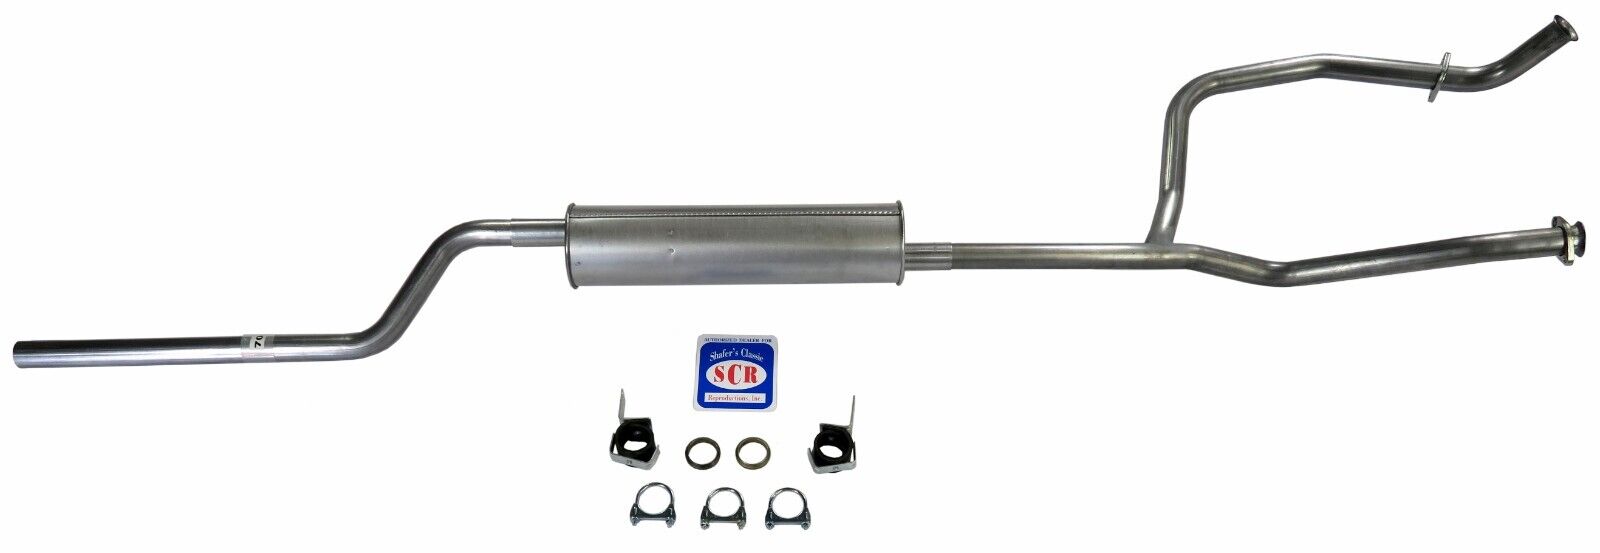 1966-1974 Bronco V8 302 Single Exhaust System with Stock Muffler